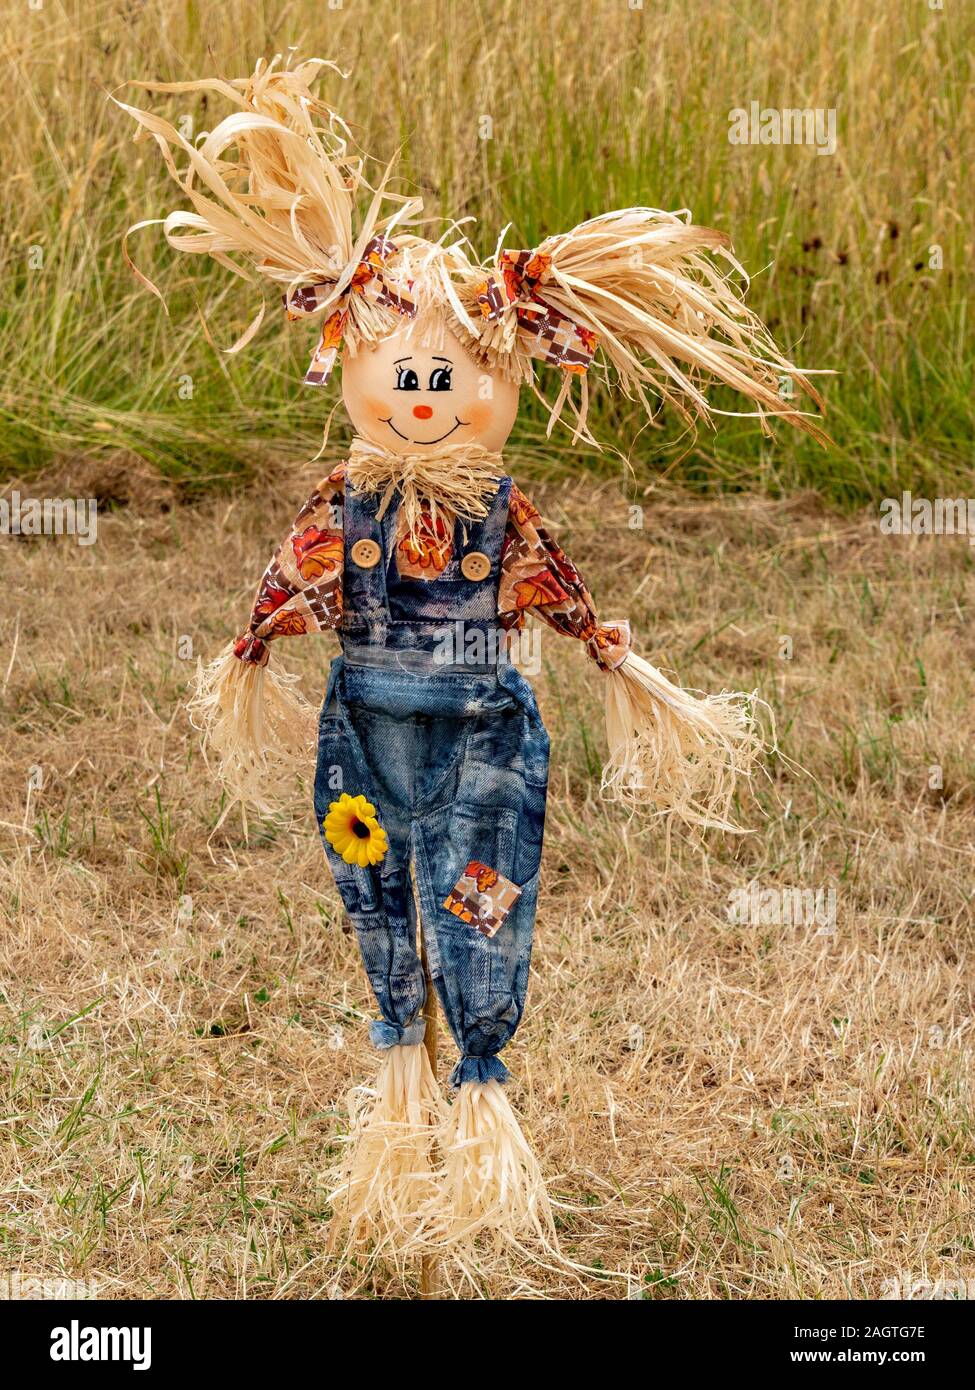 Colourful corn dolly / scarecrow / straw doll in cut grass field in Summer, England, UK. Stock Photo